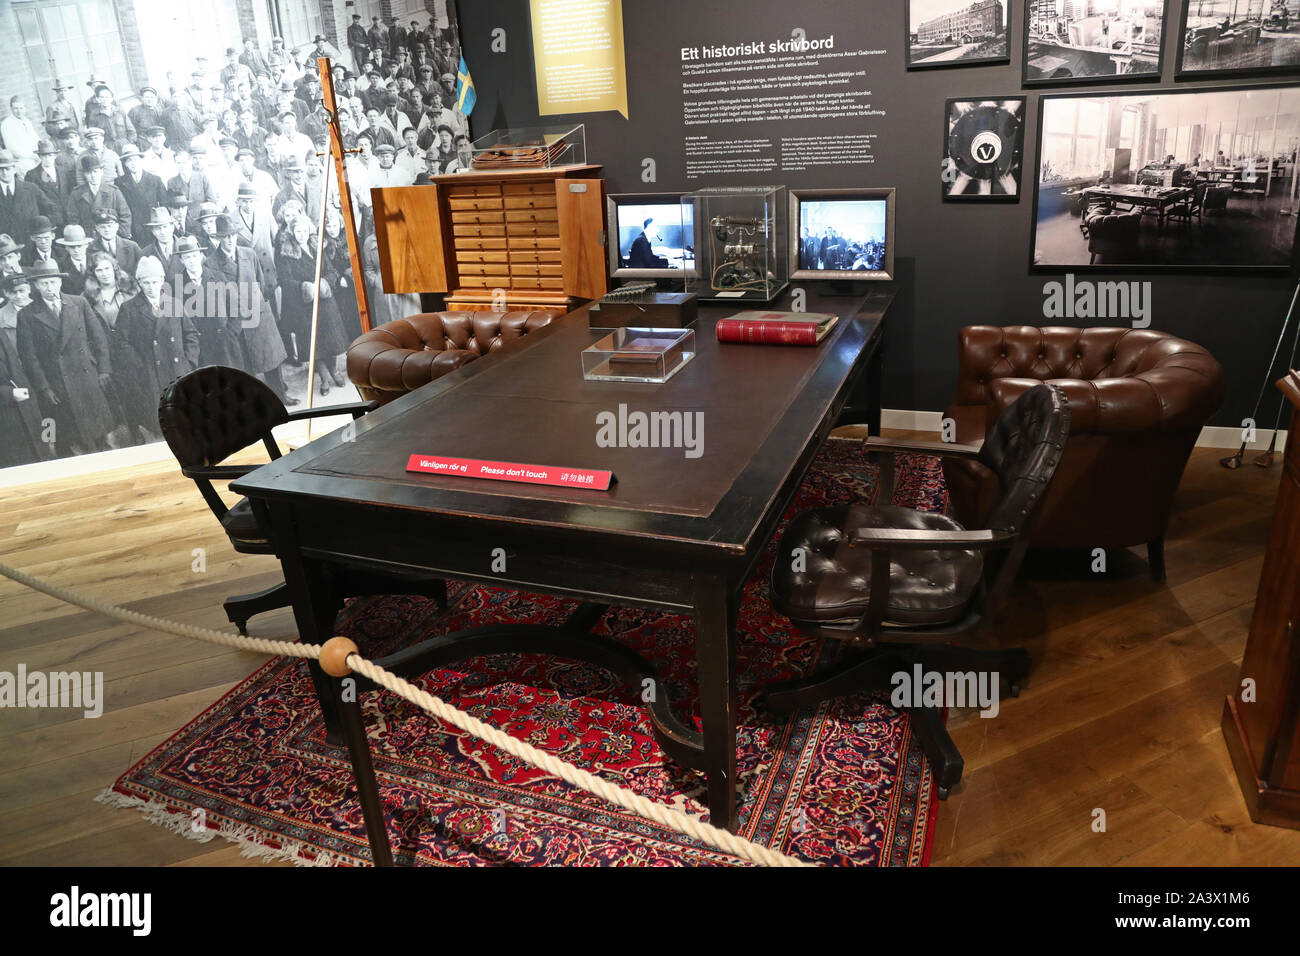 Gothenburg Museum Volvo High Resolution Stock Photography and Images - Alamy